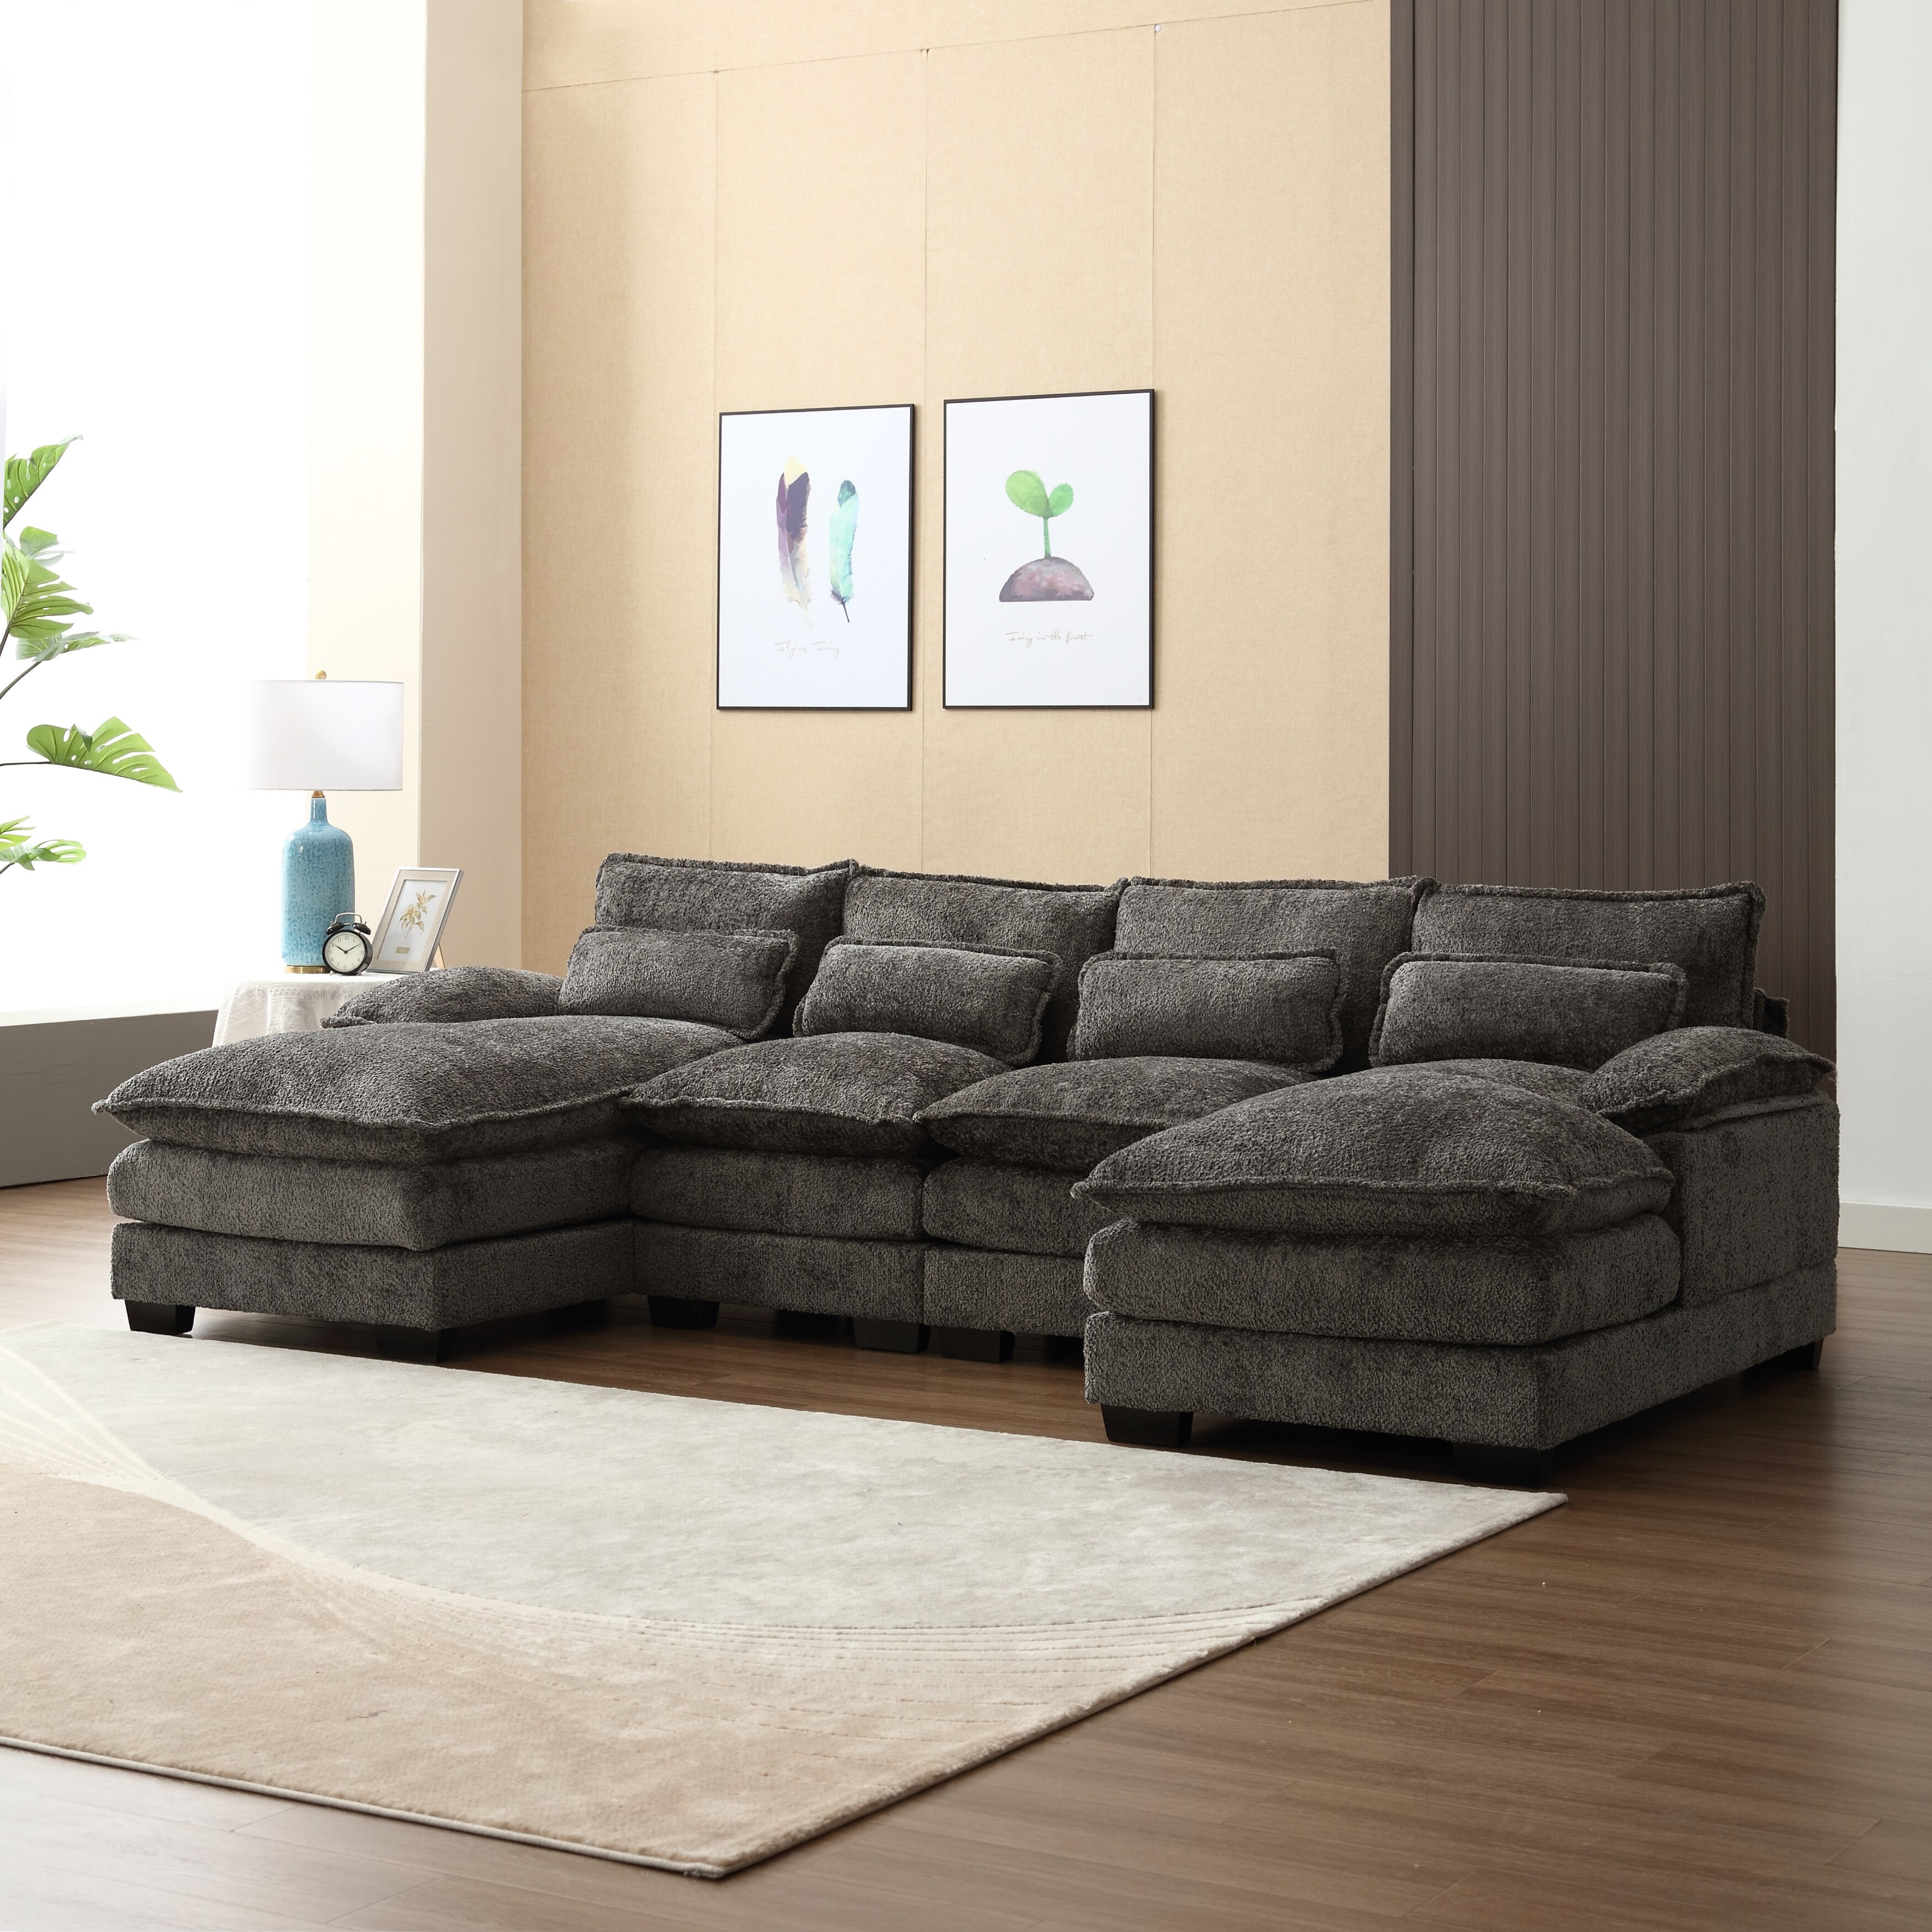 https://ak1.ostkcdn.com/images/products/is/images/direct/6ca46b03e25856571232e786ab80107331e9952b/Gray-Modern-Large-U-Shape-Sectional-Sofa-with-Throw-Pillows-and-Cushions.jpg